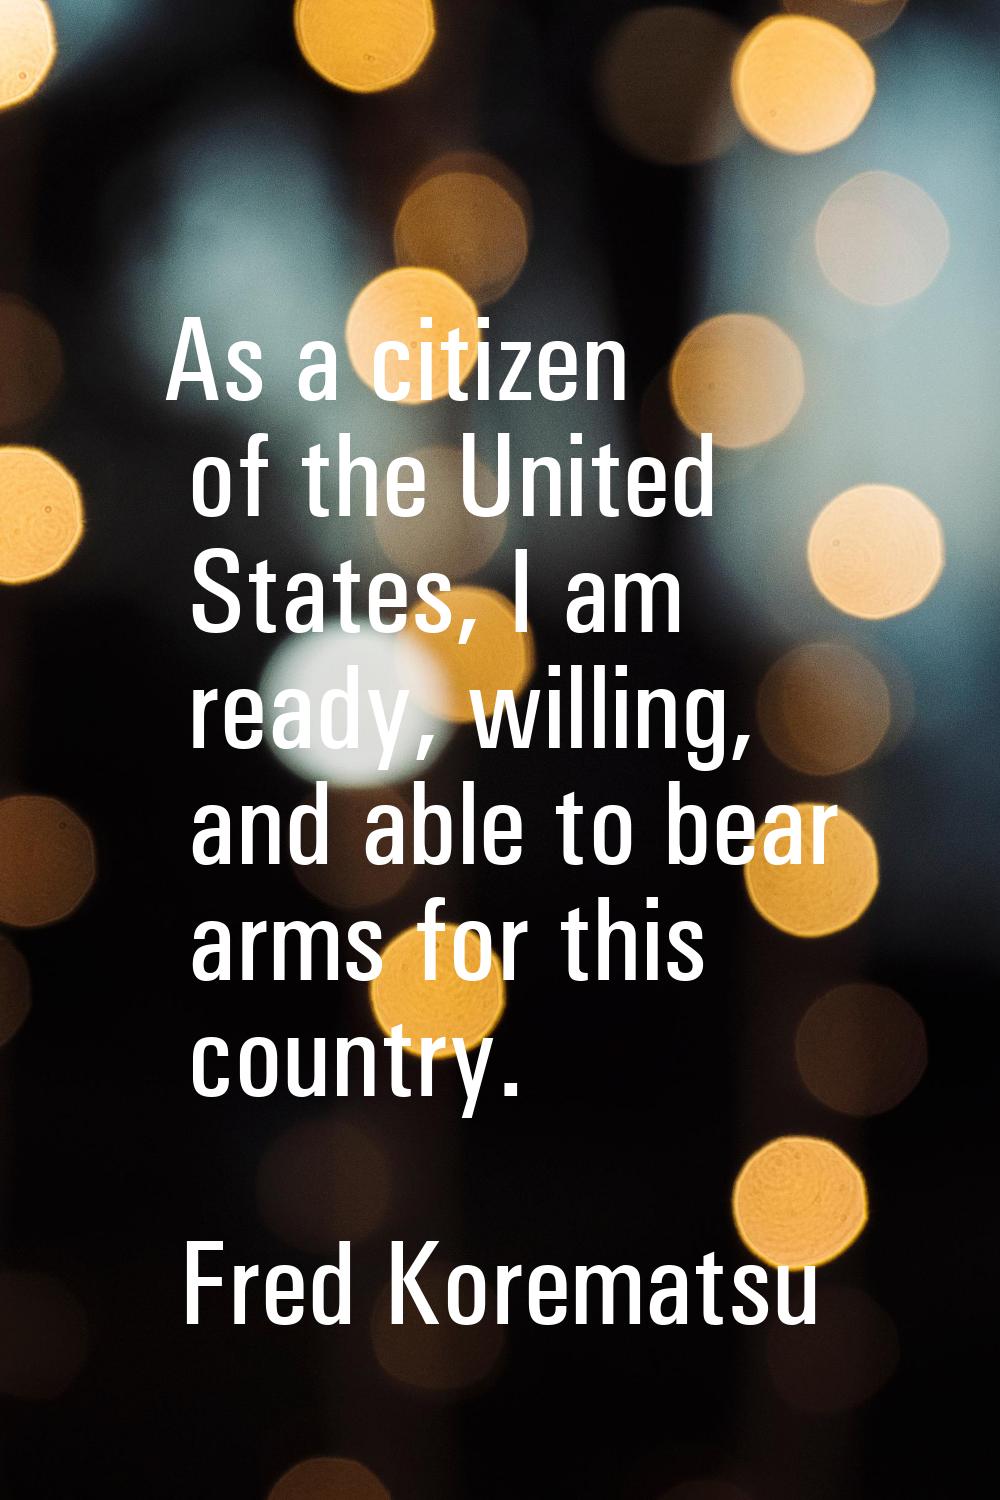 As a citizen of the United States, I am ready, willing, and able to bear arms for this country.